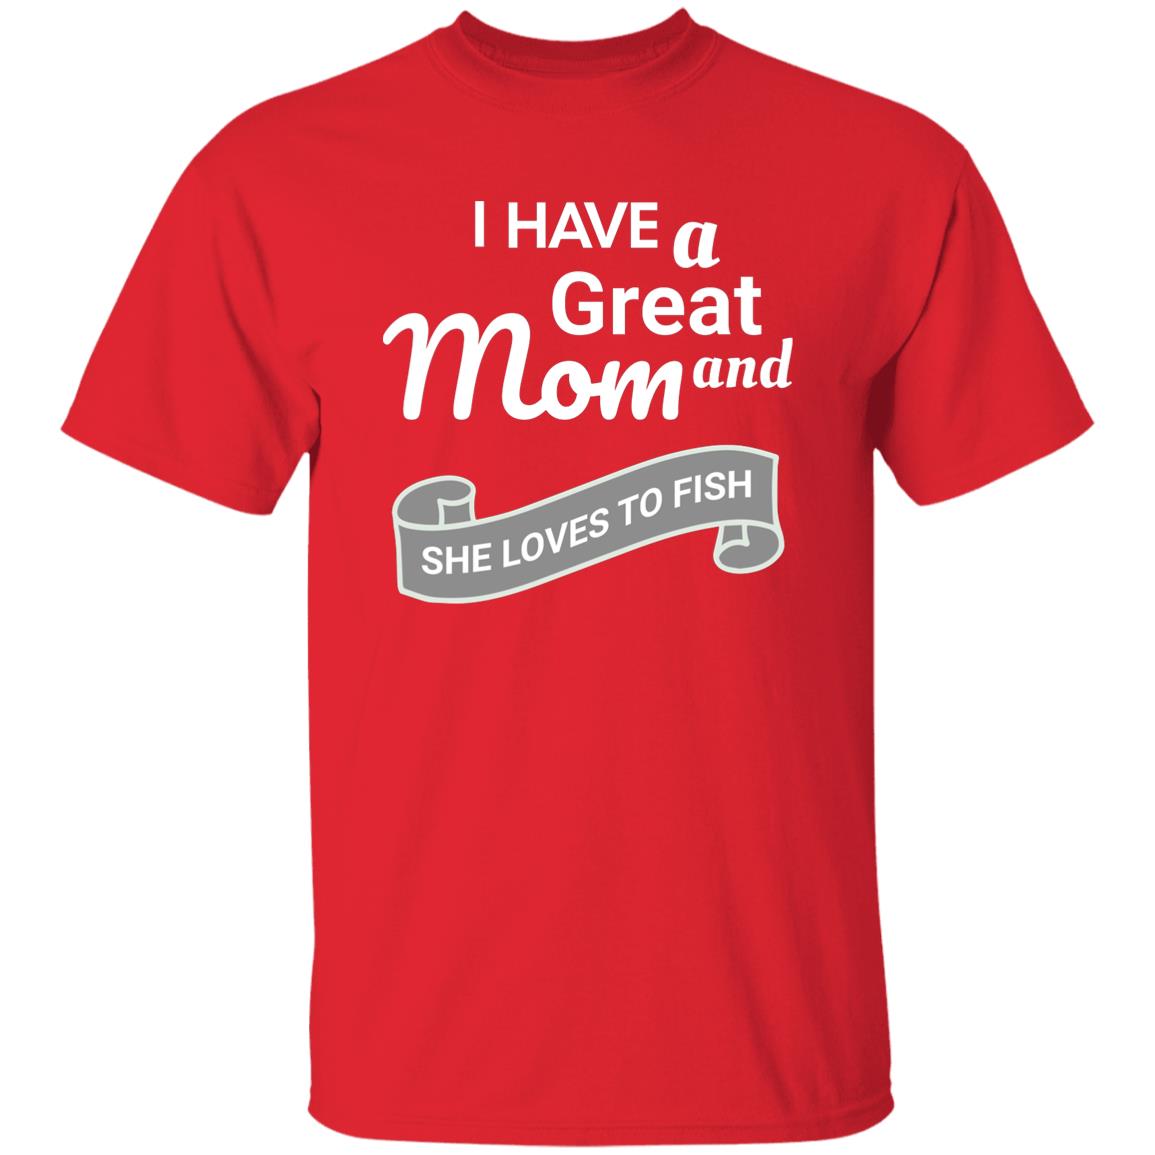 I have a great mom and she loves to fish t-shirt k red